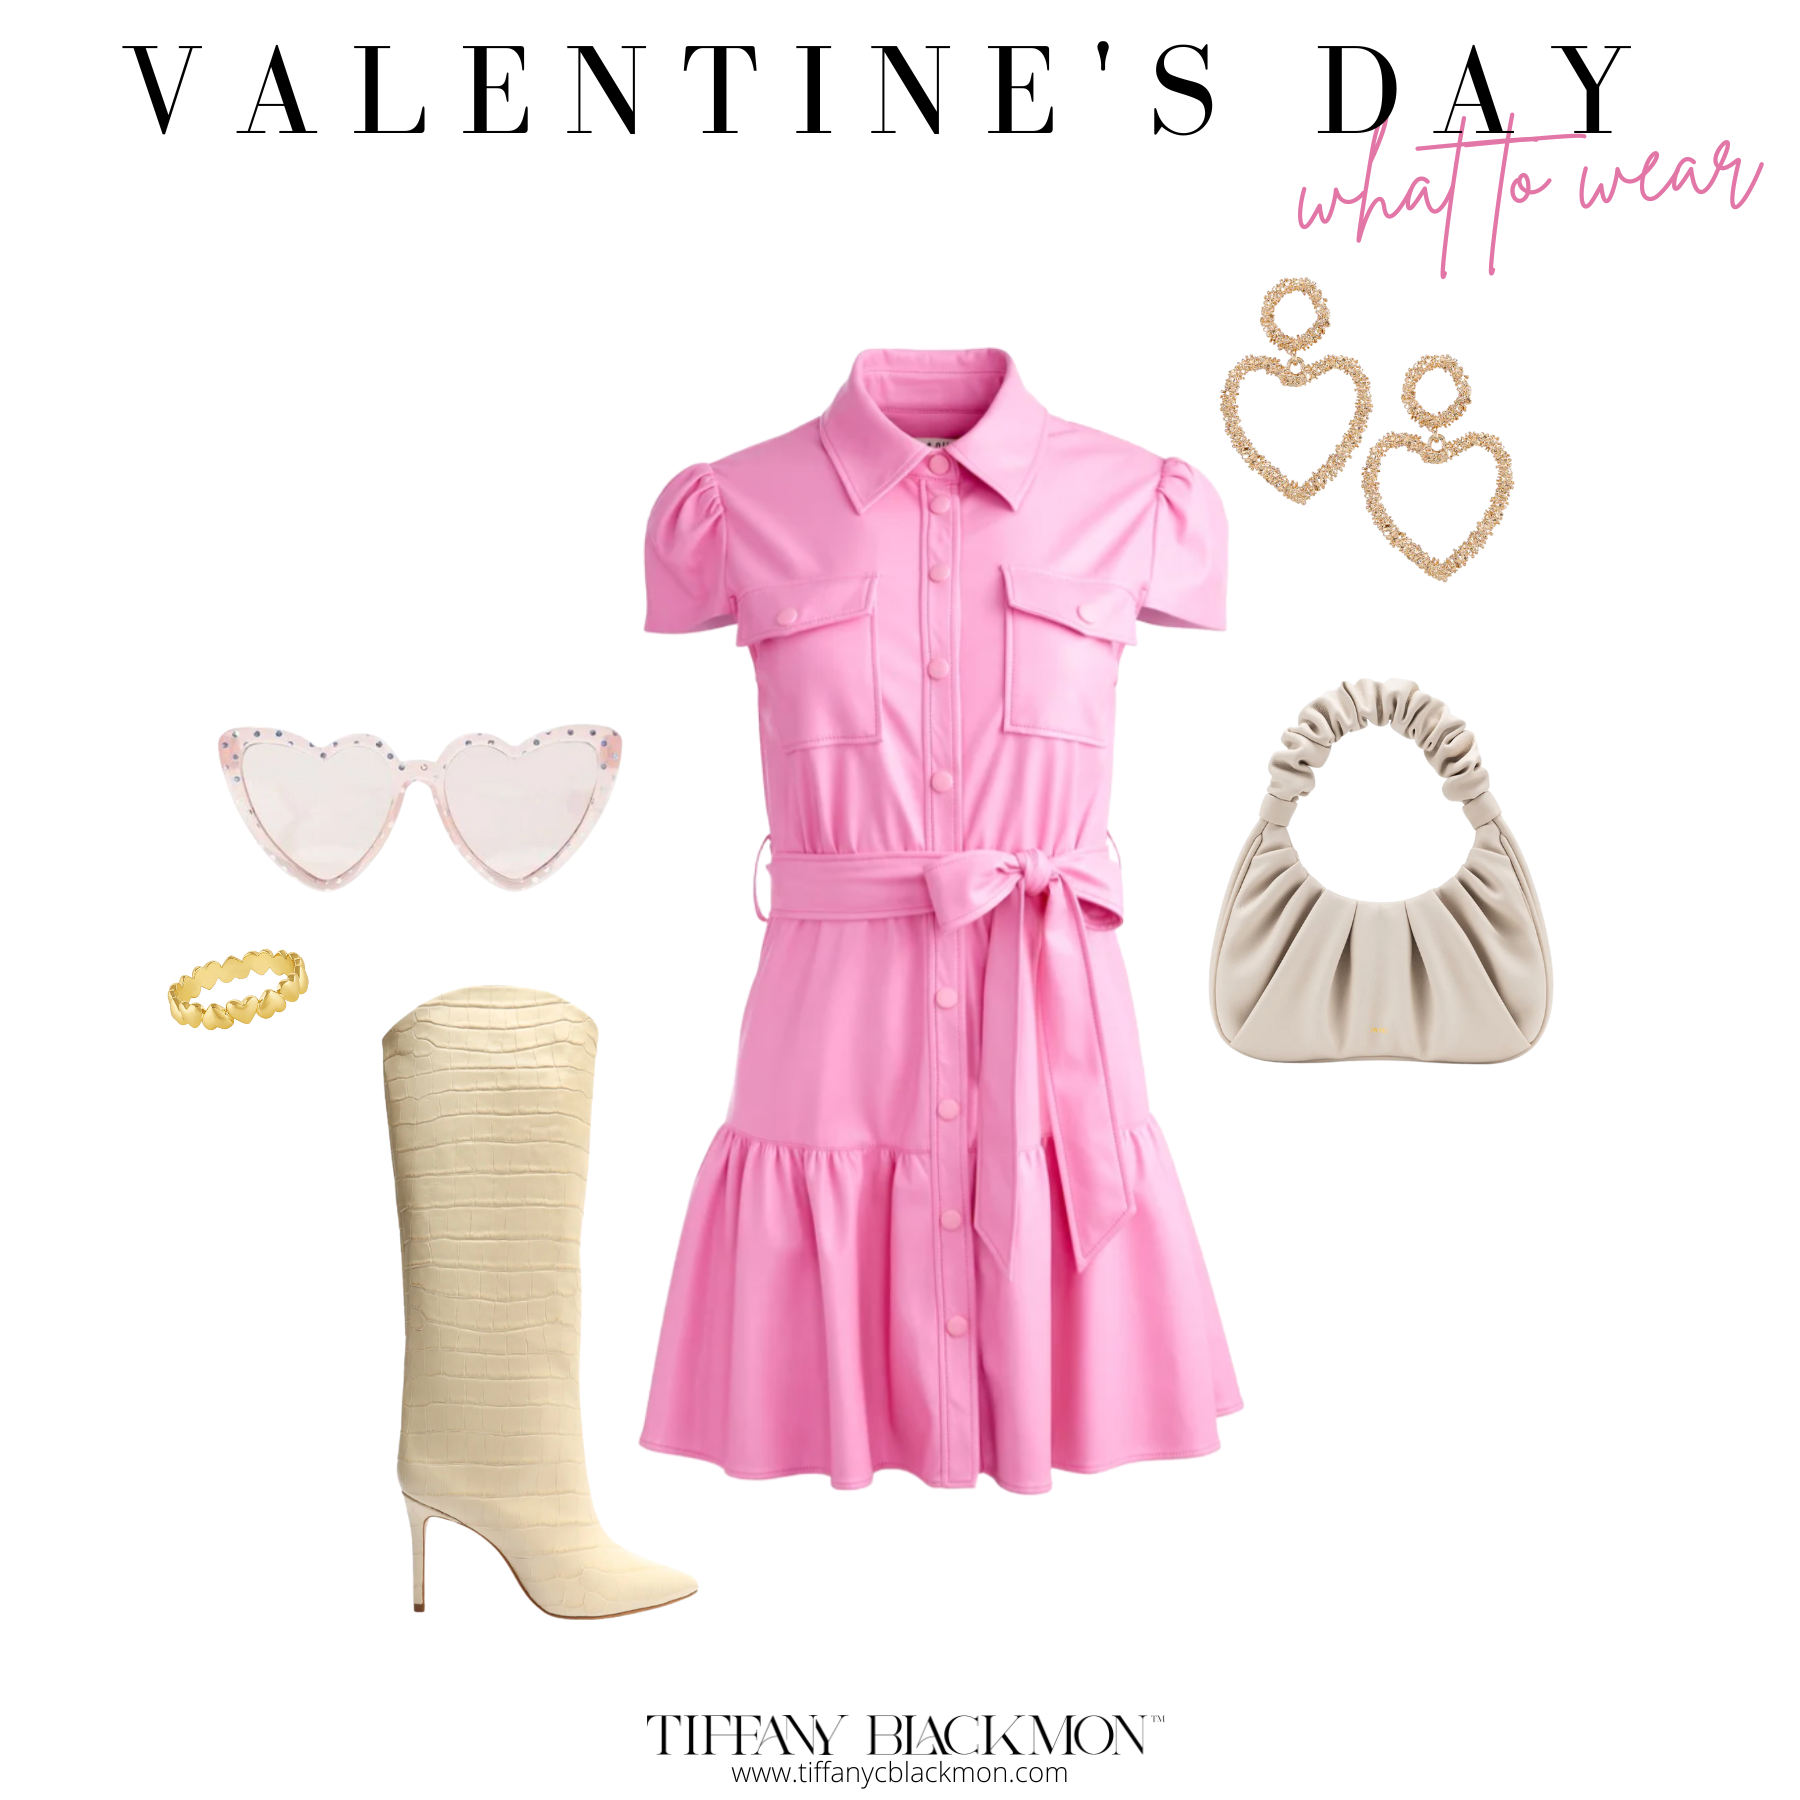 Valentine's Day: What to Wear
#pink #pinkdress #boots #tallboots #purse #jewelry #datenight #earrings #accessories